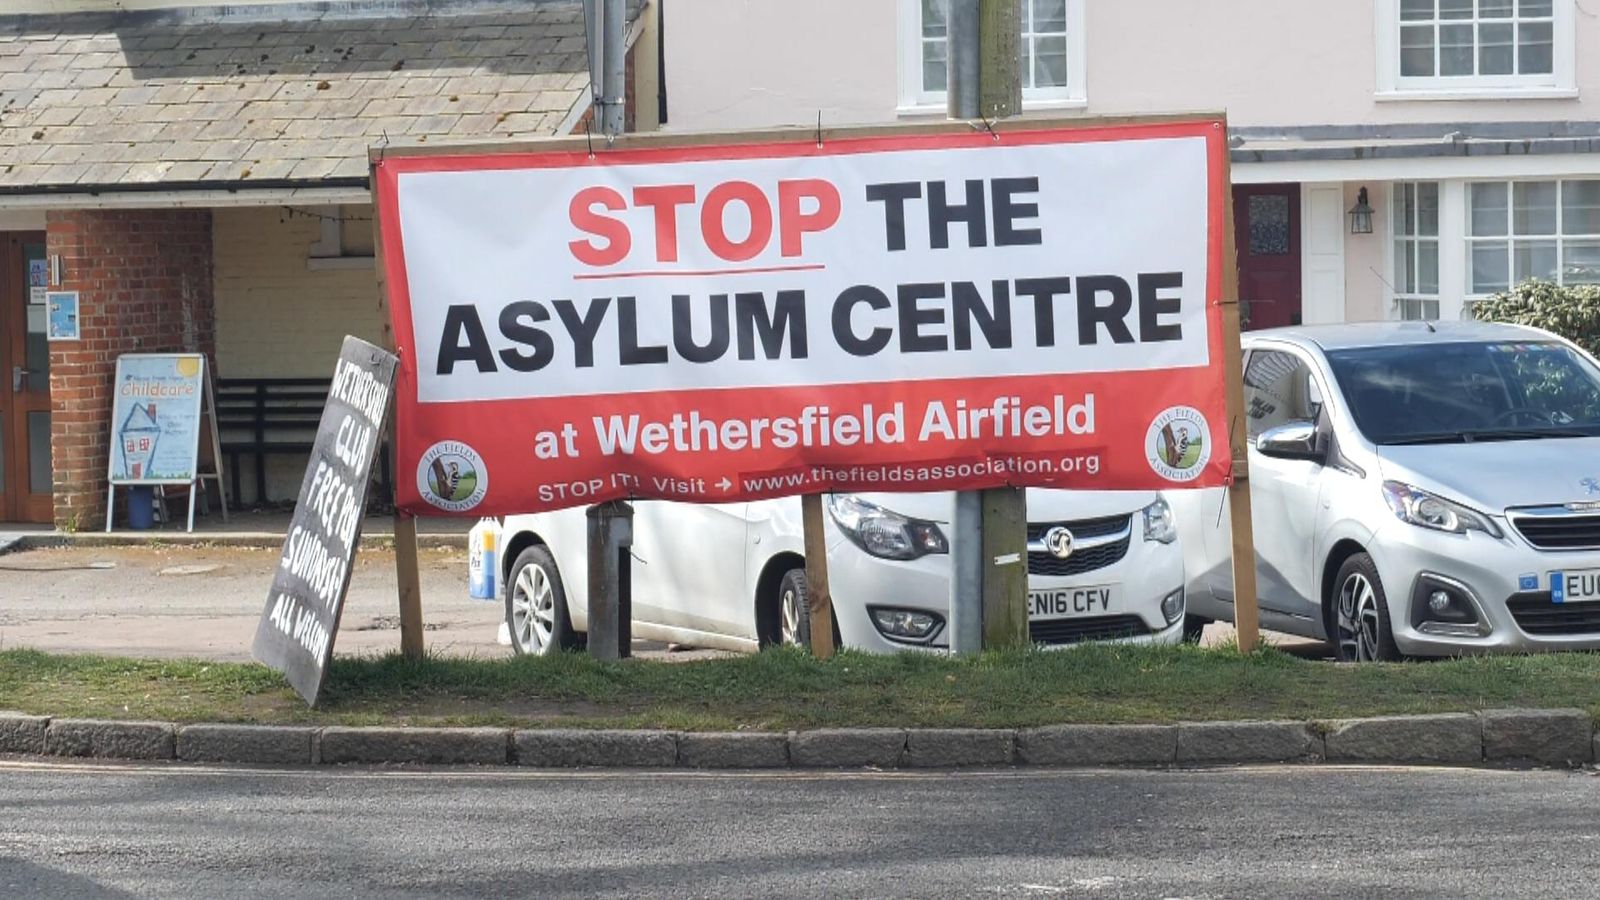 MDP Wethersfield: Council loses High Court bid to prevent asylum seekers being housed at former RAF base